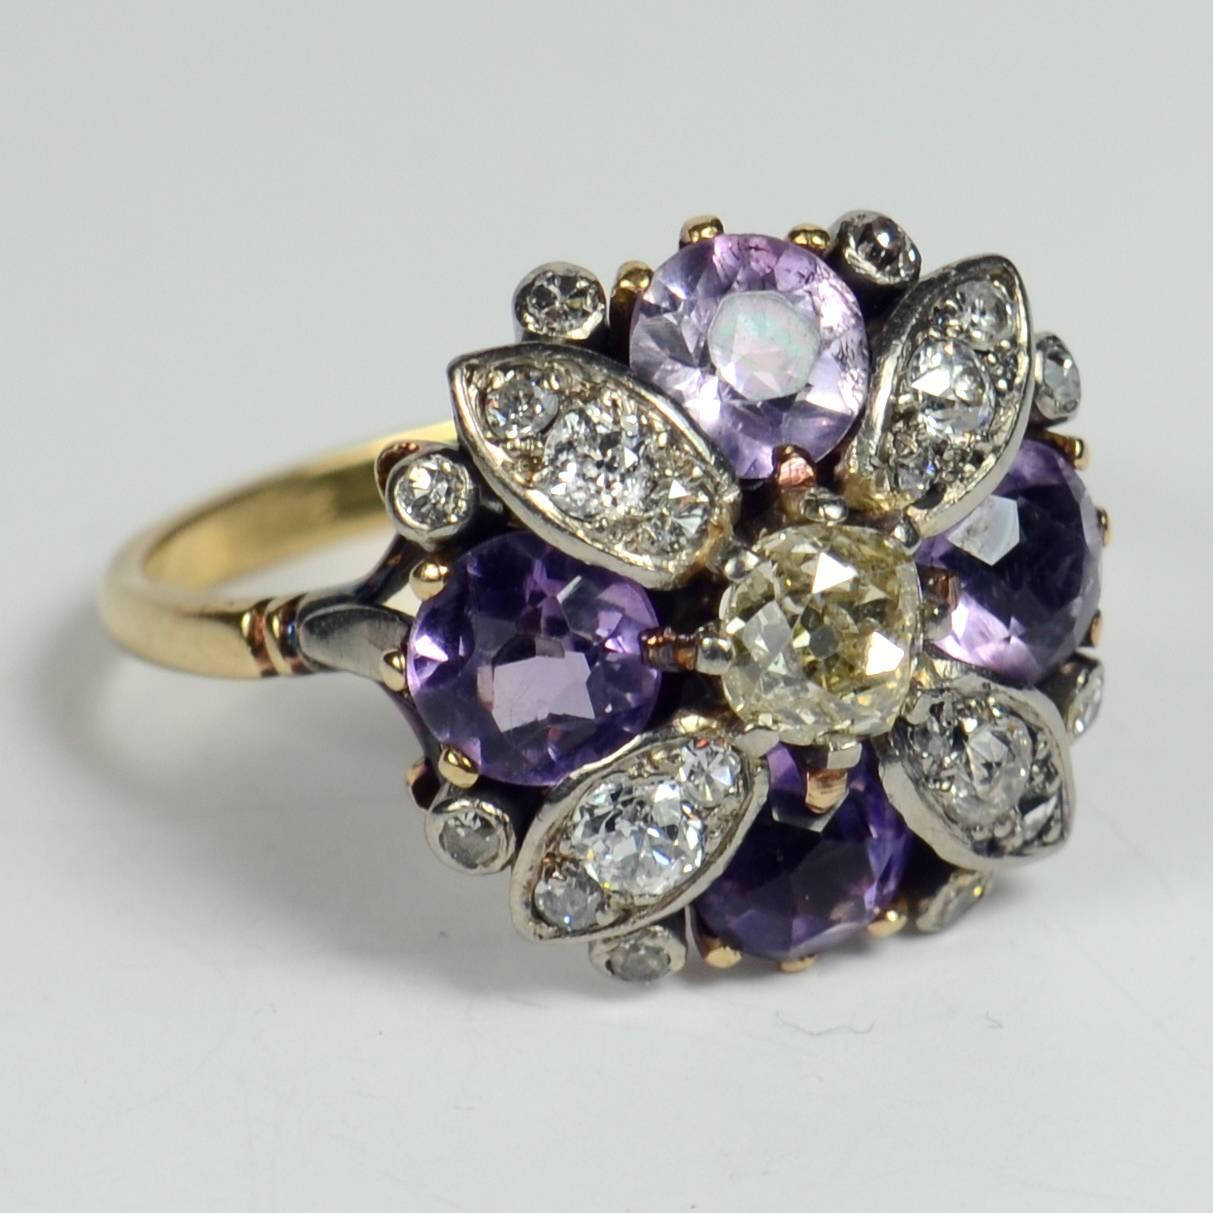 A charming flower ring in amethysts and diamonds set to the centre with a larger yellow toned old mine cut diamond. The four diamond petals are each set with three diamonds which range in size to complement the shape of the petals, and are